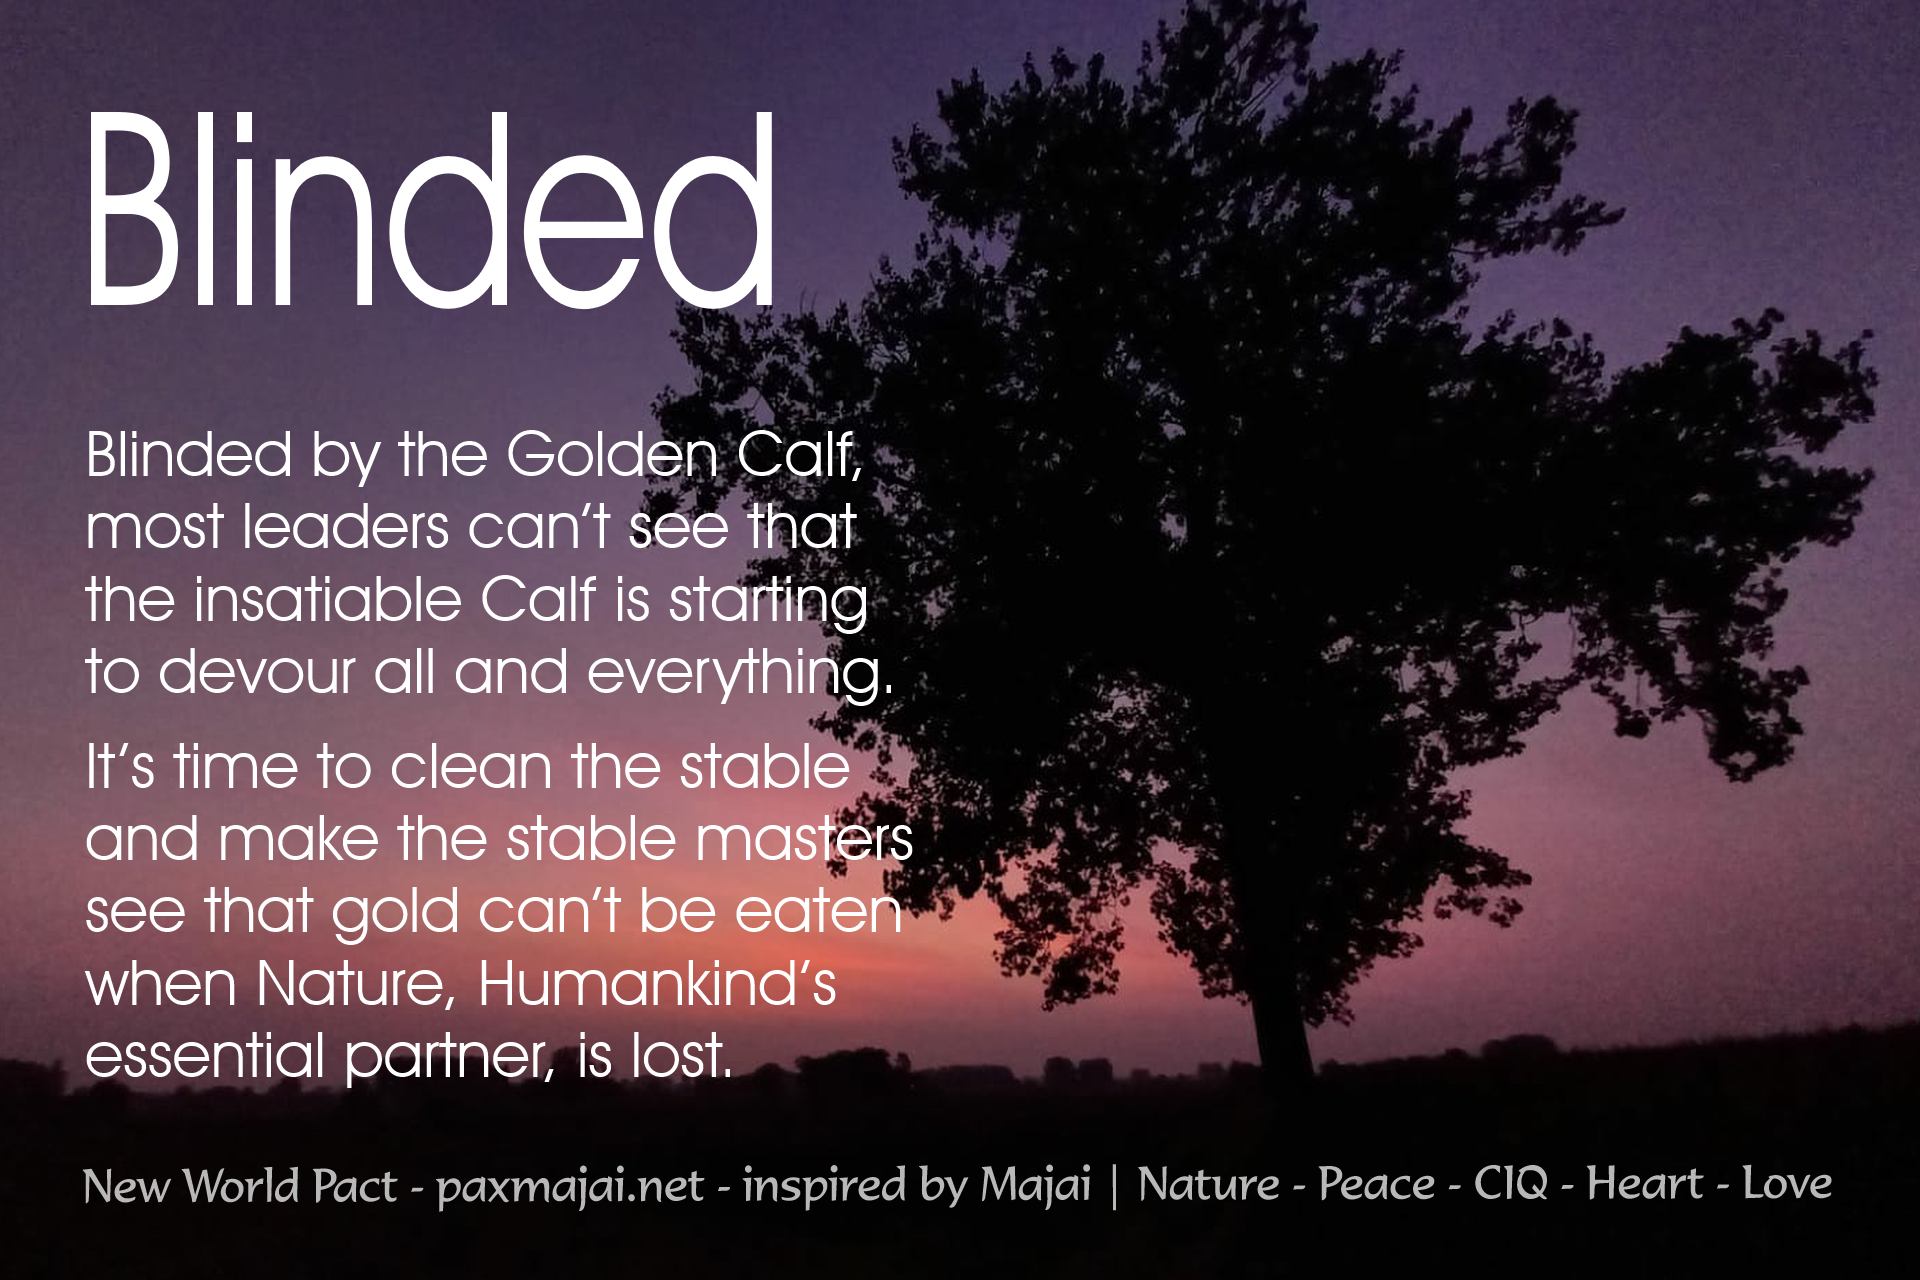 Blinded by Golden Calf